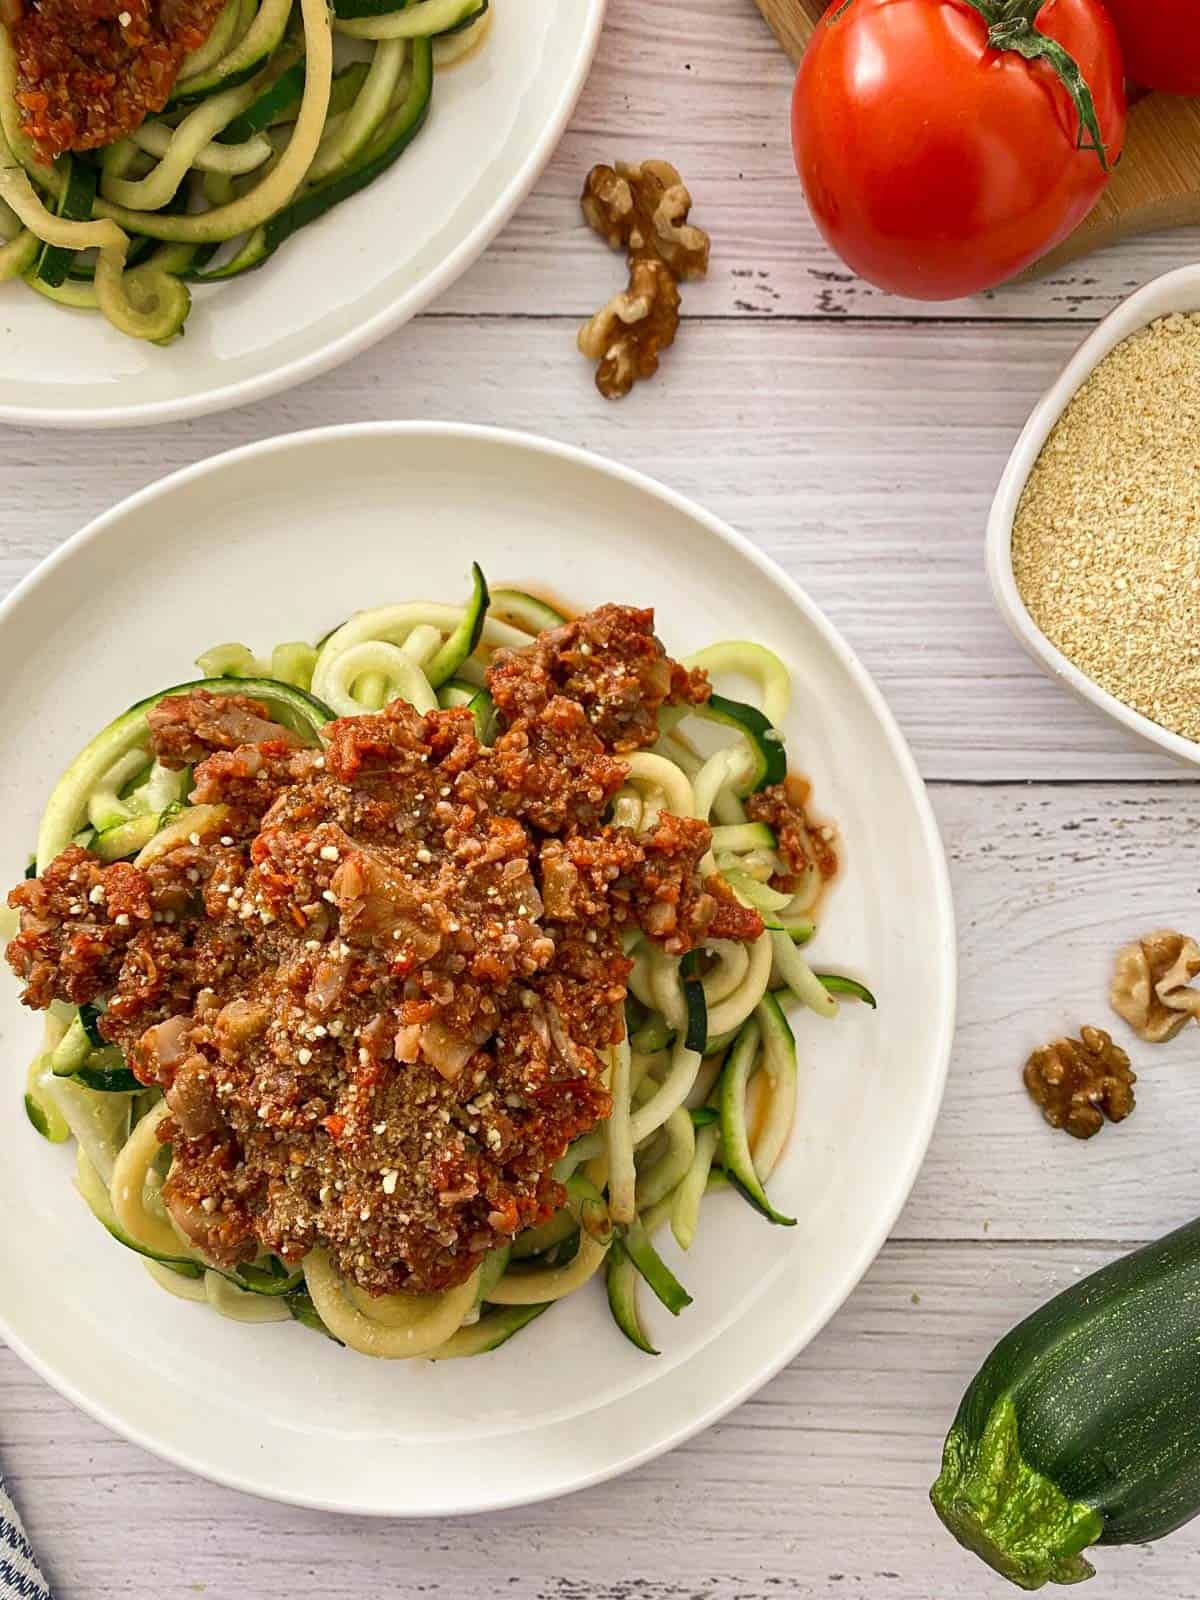 Plate of zucchini noodles with vegan bolognese sauce and parmesan cheese on top.